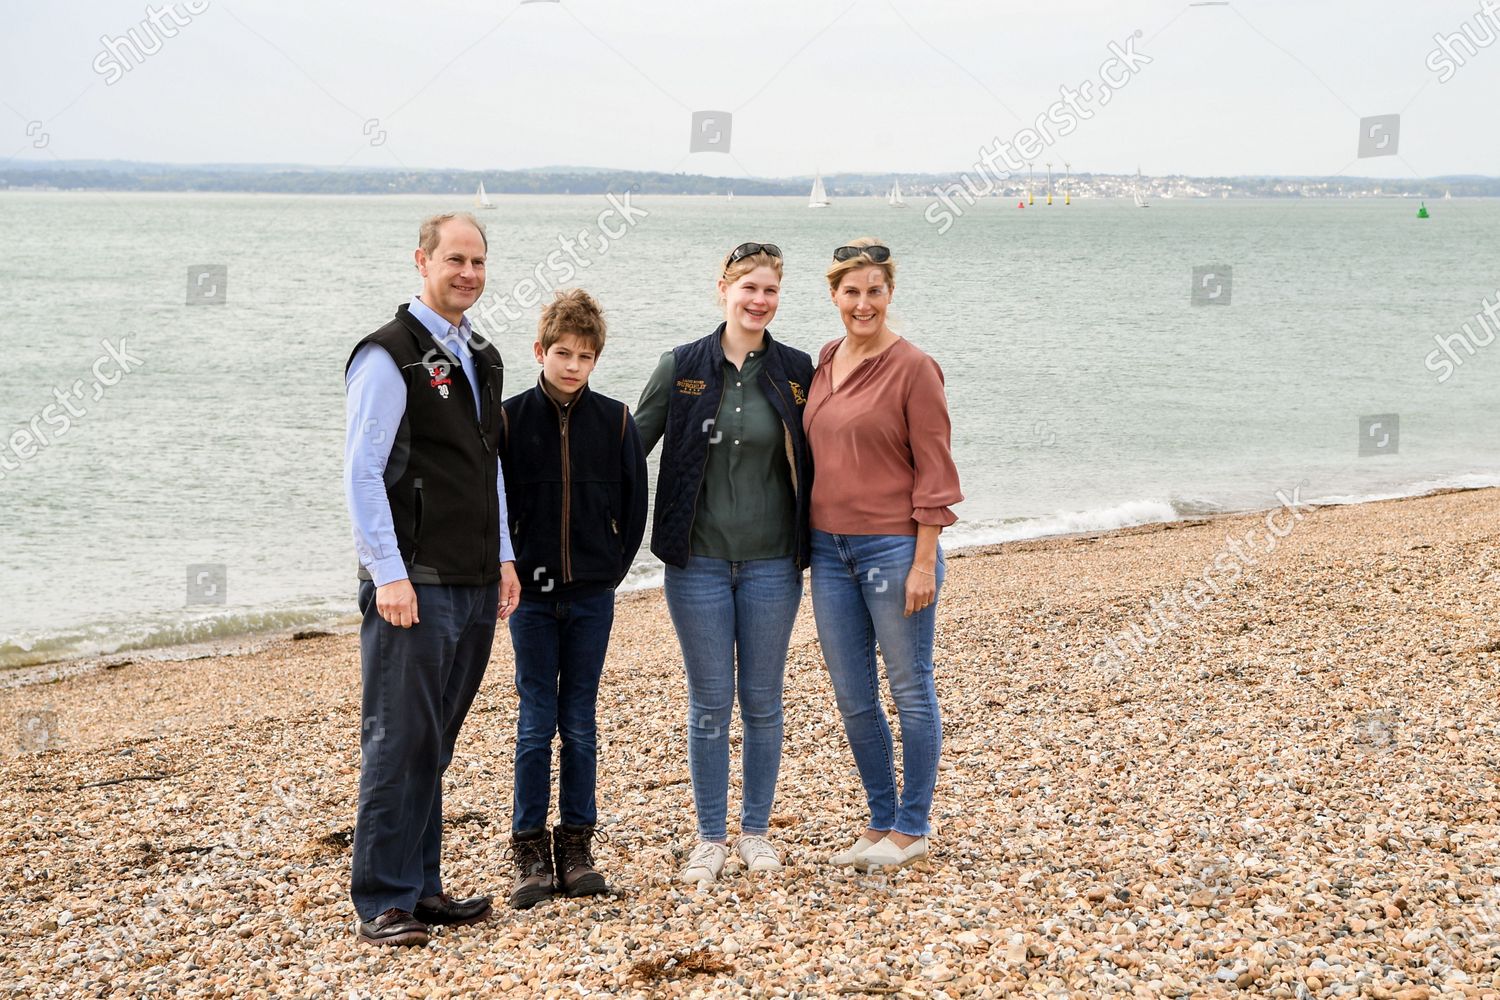 prince-edward-and-sophie-countess-of-wessex-great-british-beach-clean-southsea-beach-portsmouth-uk-shutterstock-editorial-10782998ao.jpg